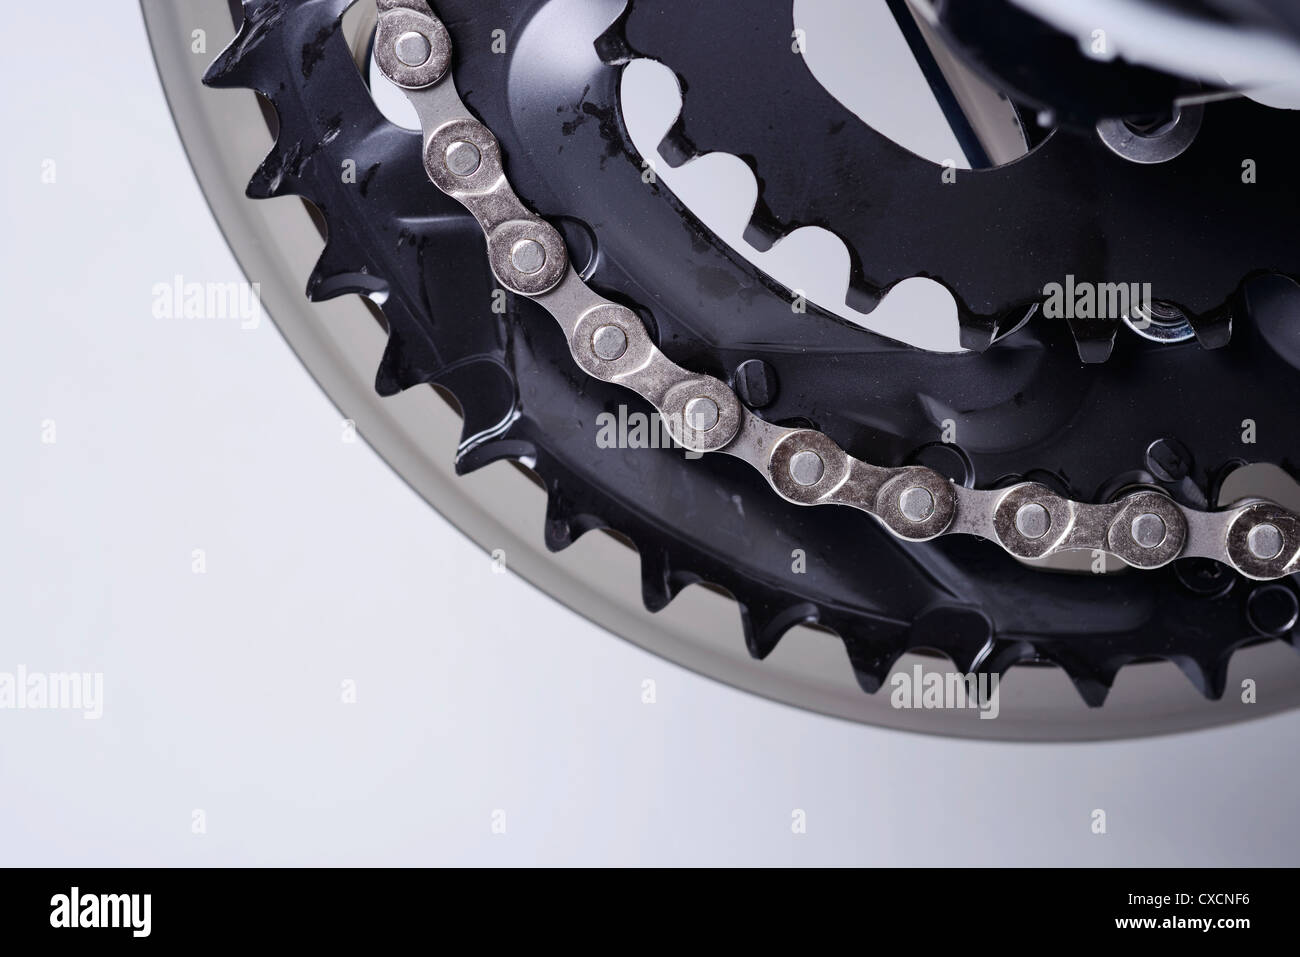 Bicycle front chainring detail Stock Photo